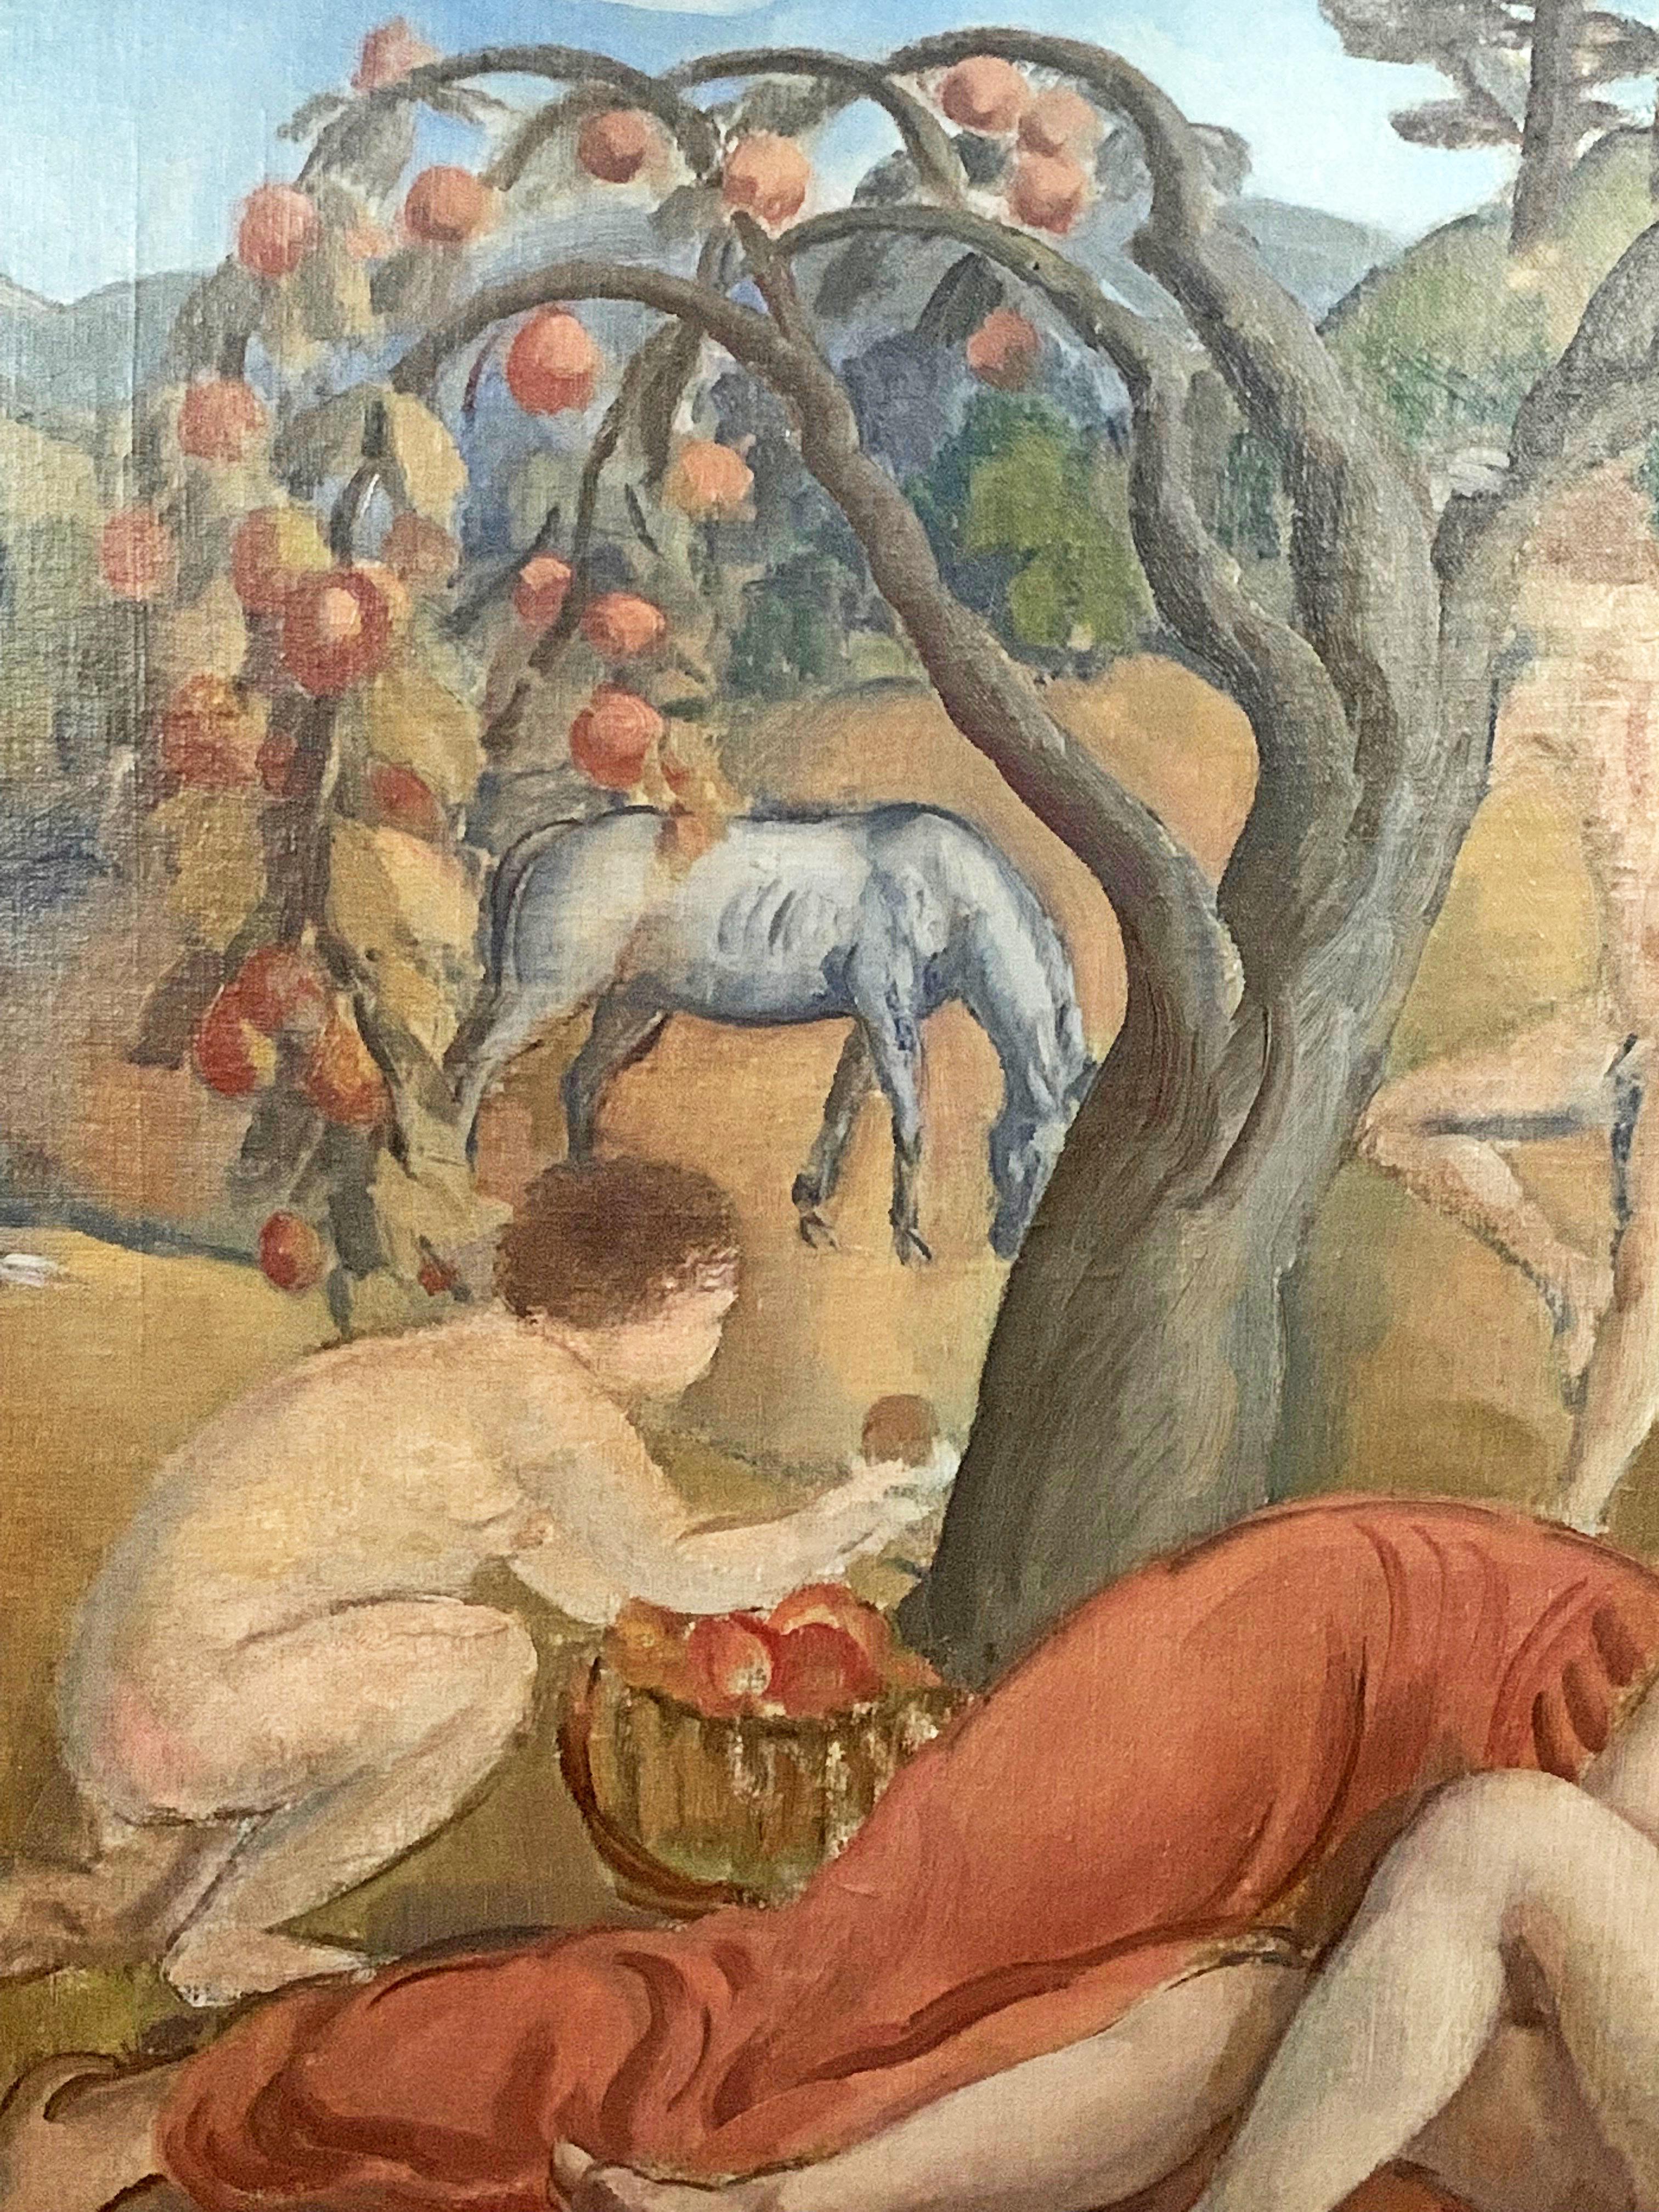 This gorgeous, idyllic depiction of nude figures enjoying the beauty and abundance of Arcadia, some picking apples and others making love, was painted by David Karfunkle in the 1930s, who immigrated from Austria to America and studied at the